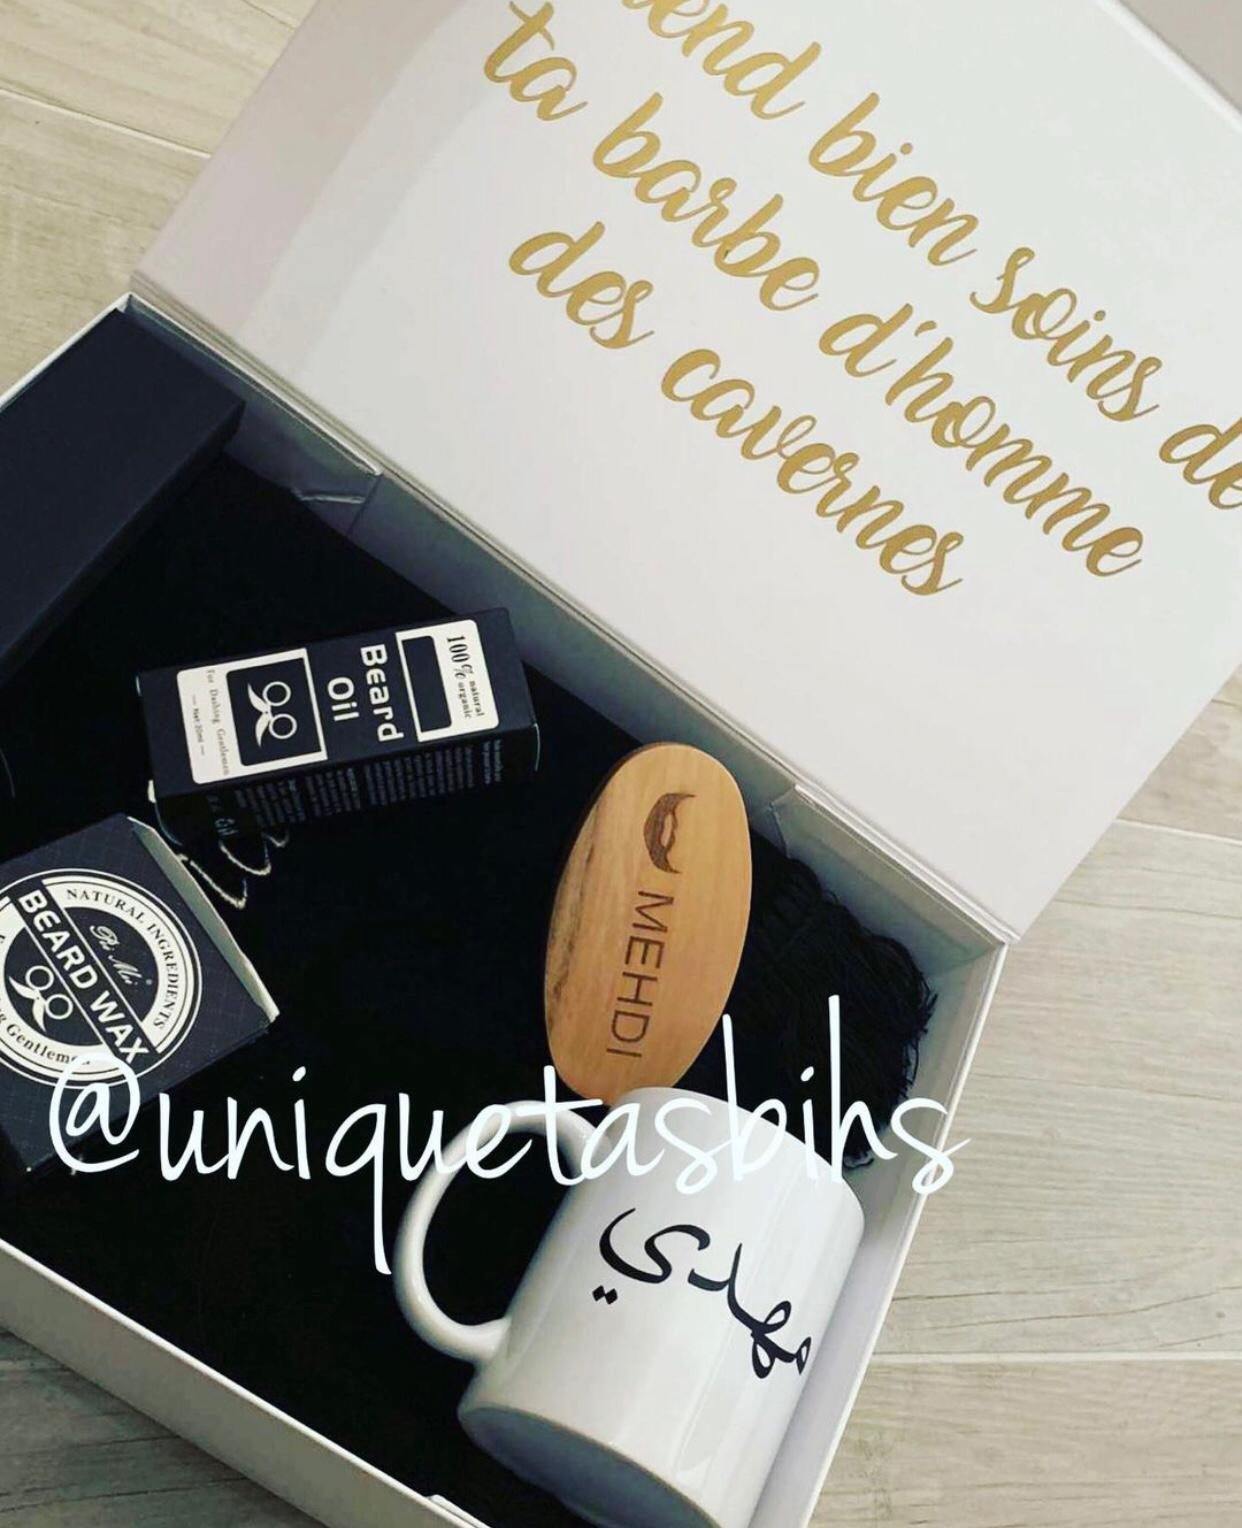 Personalized gift box with beard products (Rug - Tasbih - Mug - Brush - Beard products) - Unique Tasbihs & Gifts